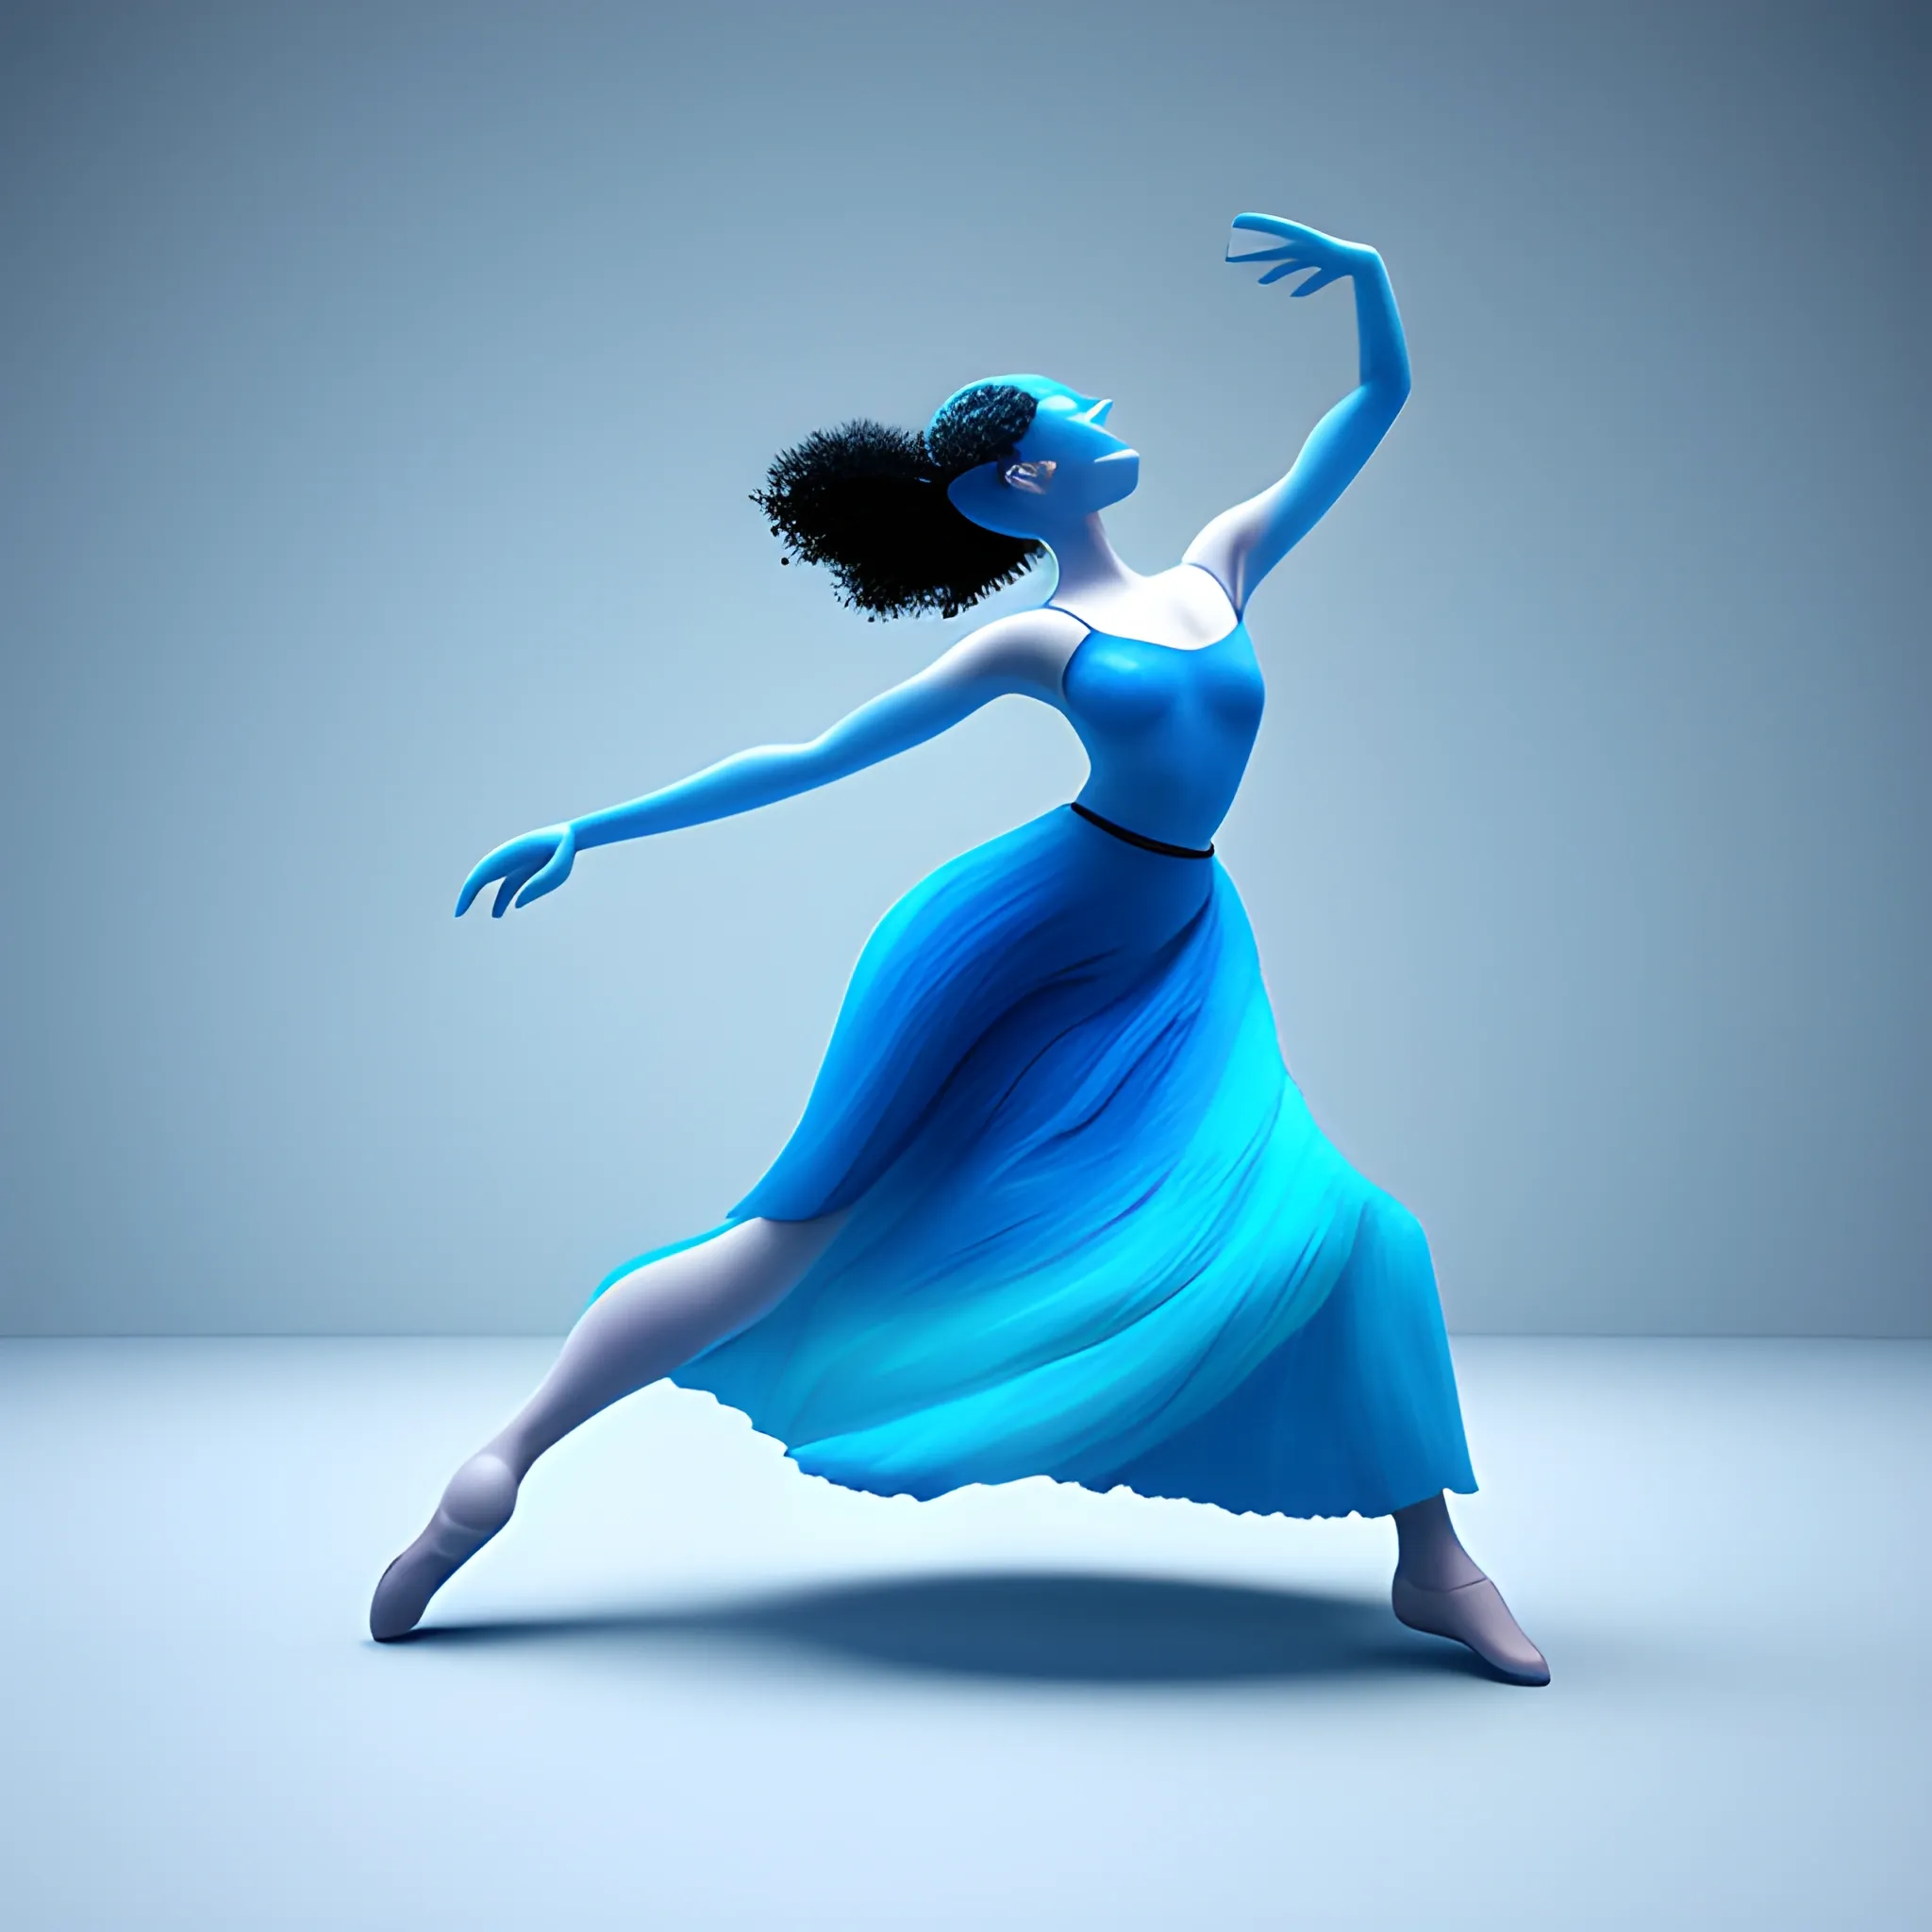 painting with a woman to dance and have dence movement minimal elements and baroc colors all scale of blue 
fantasy, 8k, high resolution, high quality, 3D